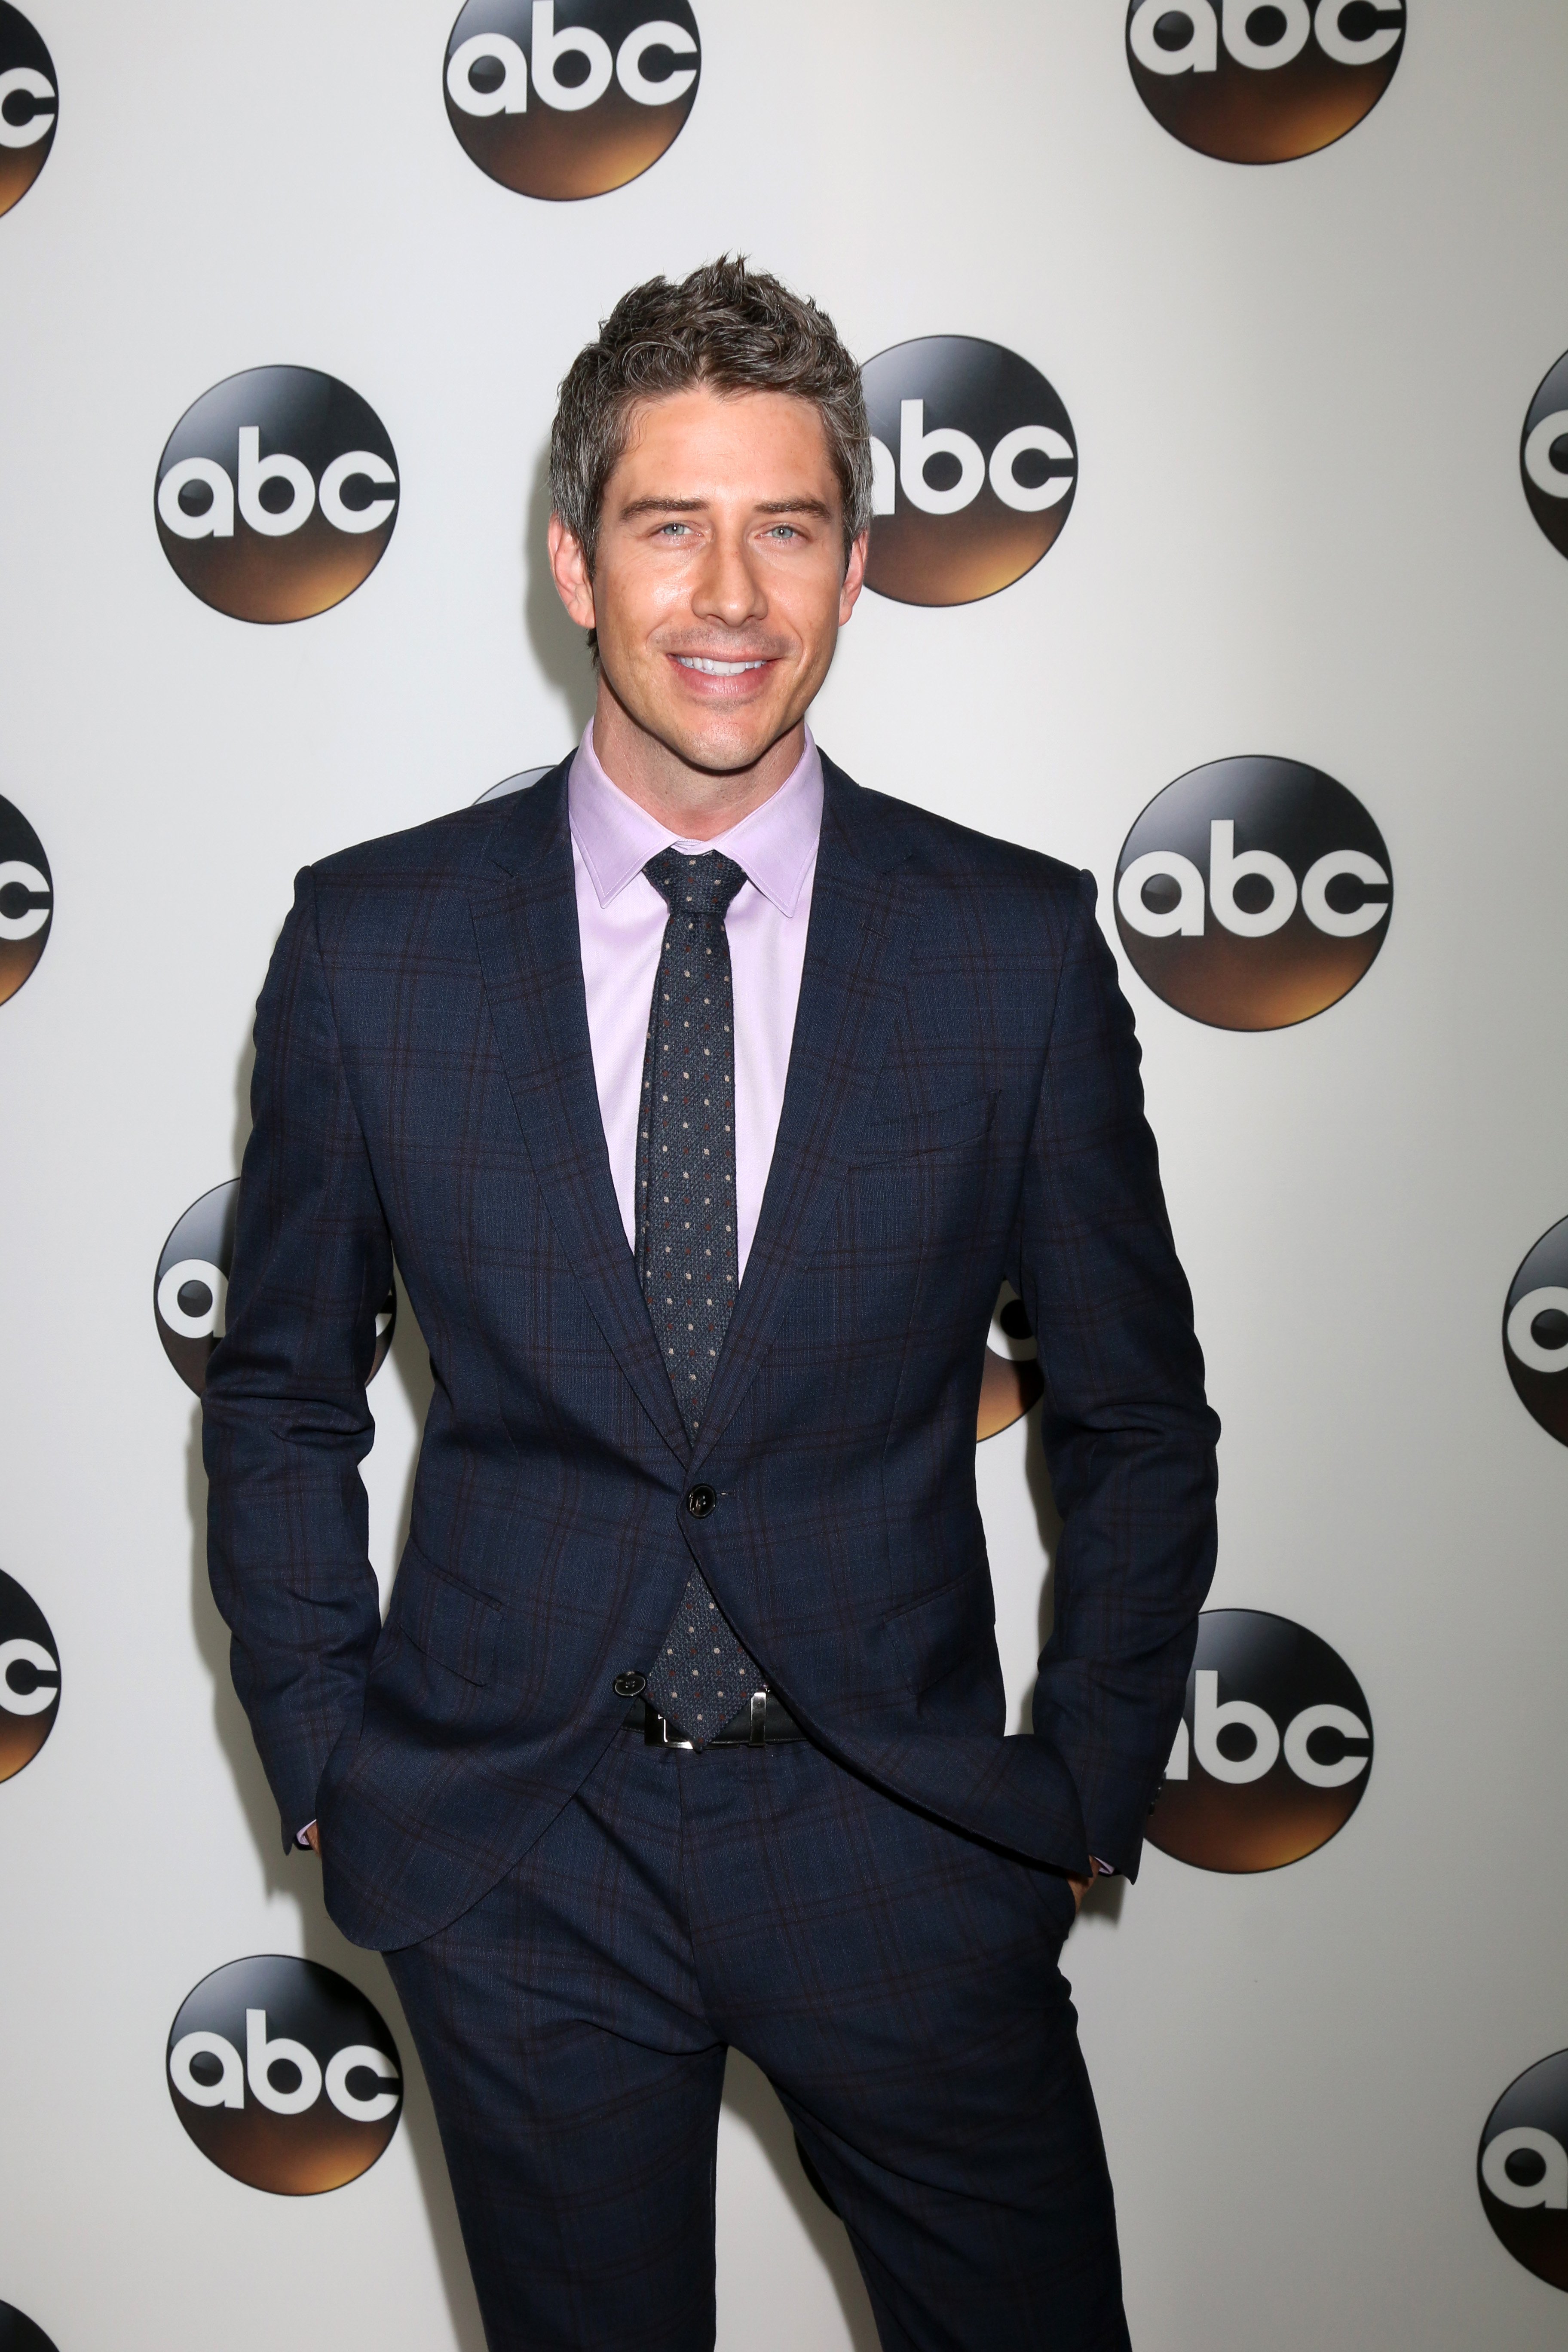 Arie Luyendyk Jr at the ABC TCA Winter 2018 Party at Langham Huntington Hotel on January 8, 2018 in Pasadena, CA | Source: Shutterstock